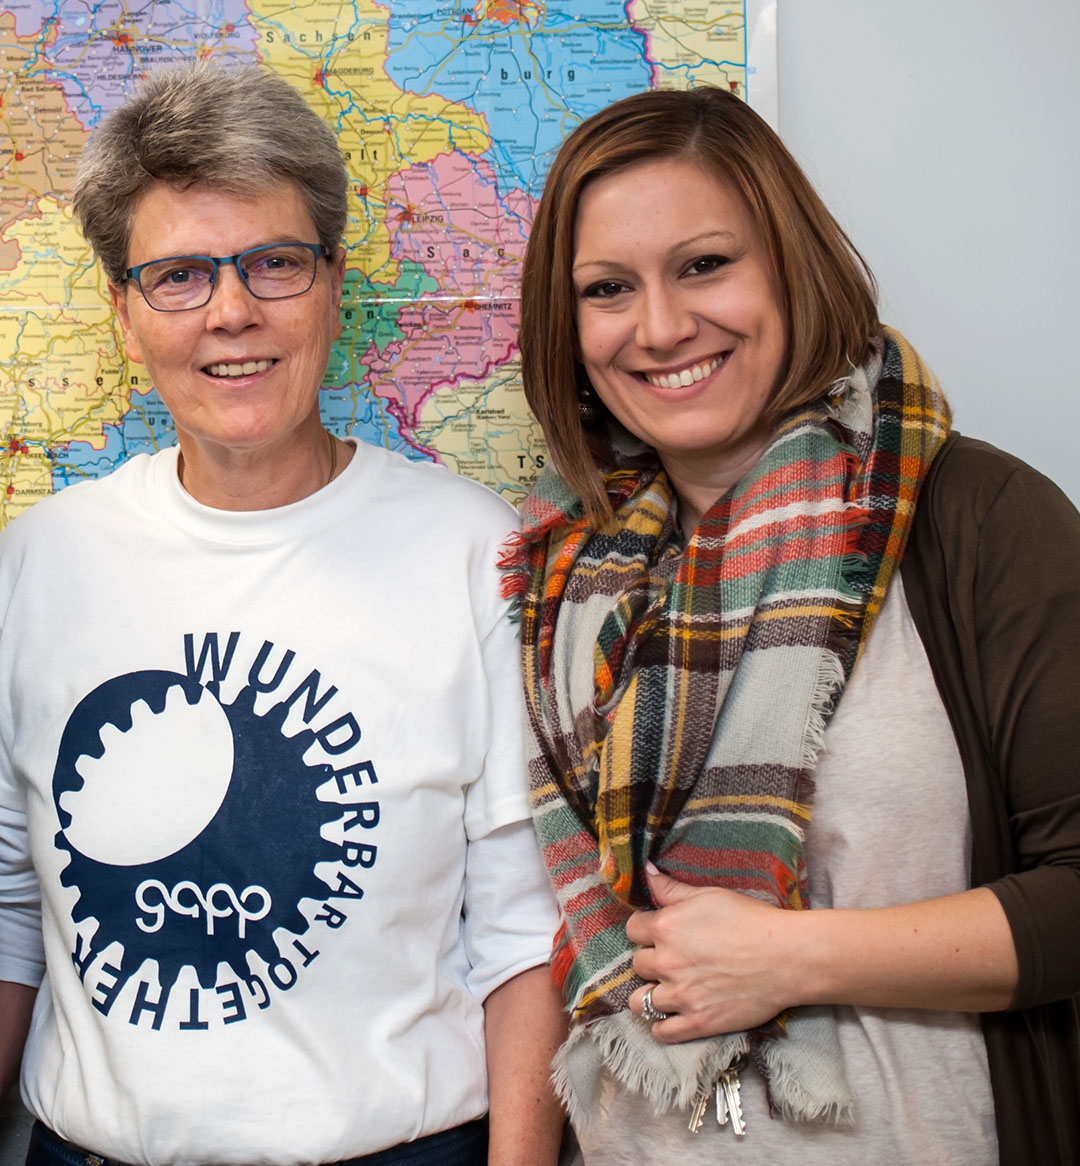 Heike Armbrust, left, an English teacher and German educator at the Anne-Frank-Gymnasium in Werne, Germany, and Nicole Whitescarver, a German teacher at Greenwood High School (Warren County), team teach in Whitescarver's classroom. Submitted photo by Karen Phillips Littlewood